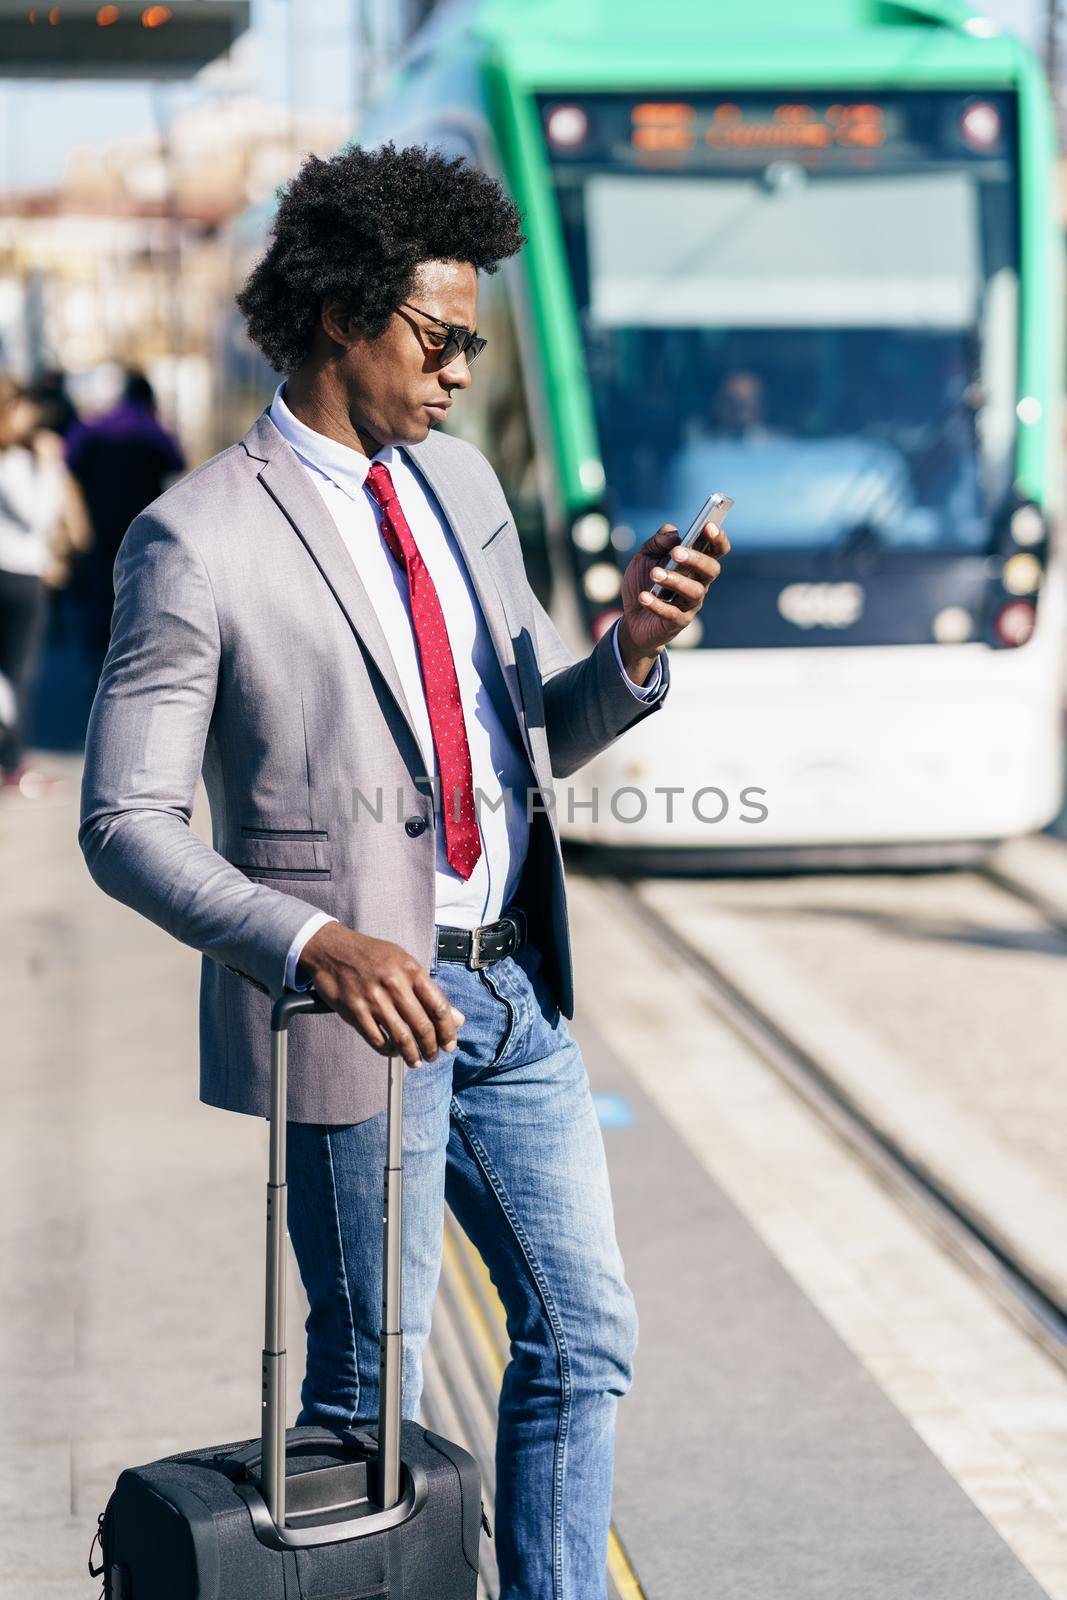 Black Businessman waiting for the next train by javiindy